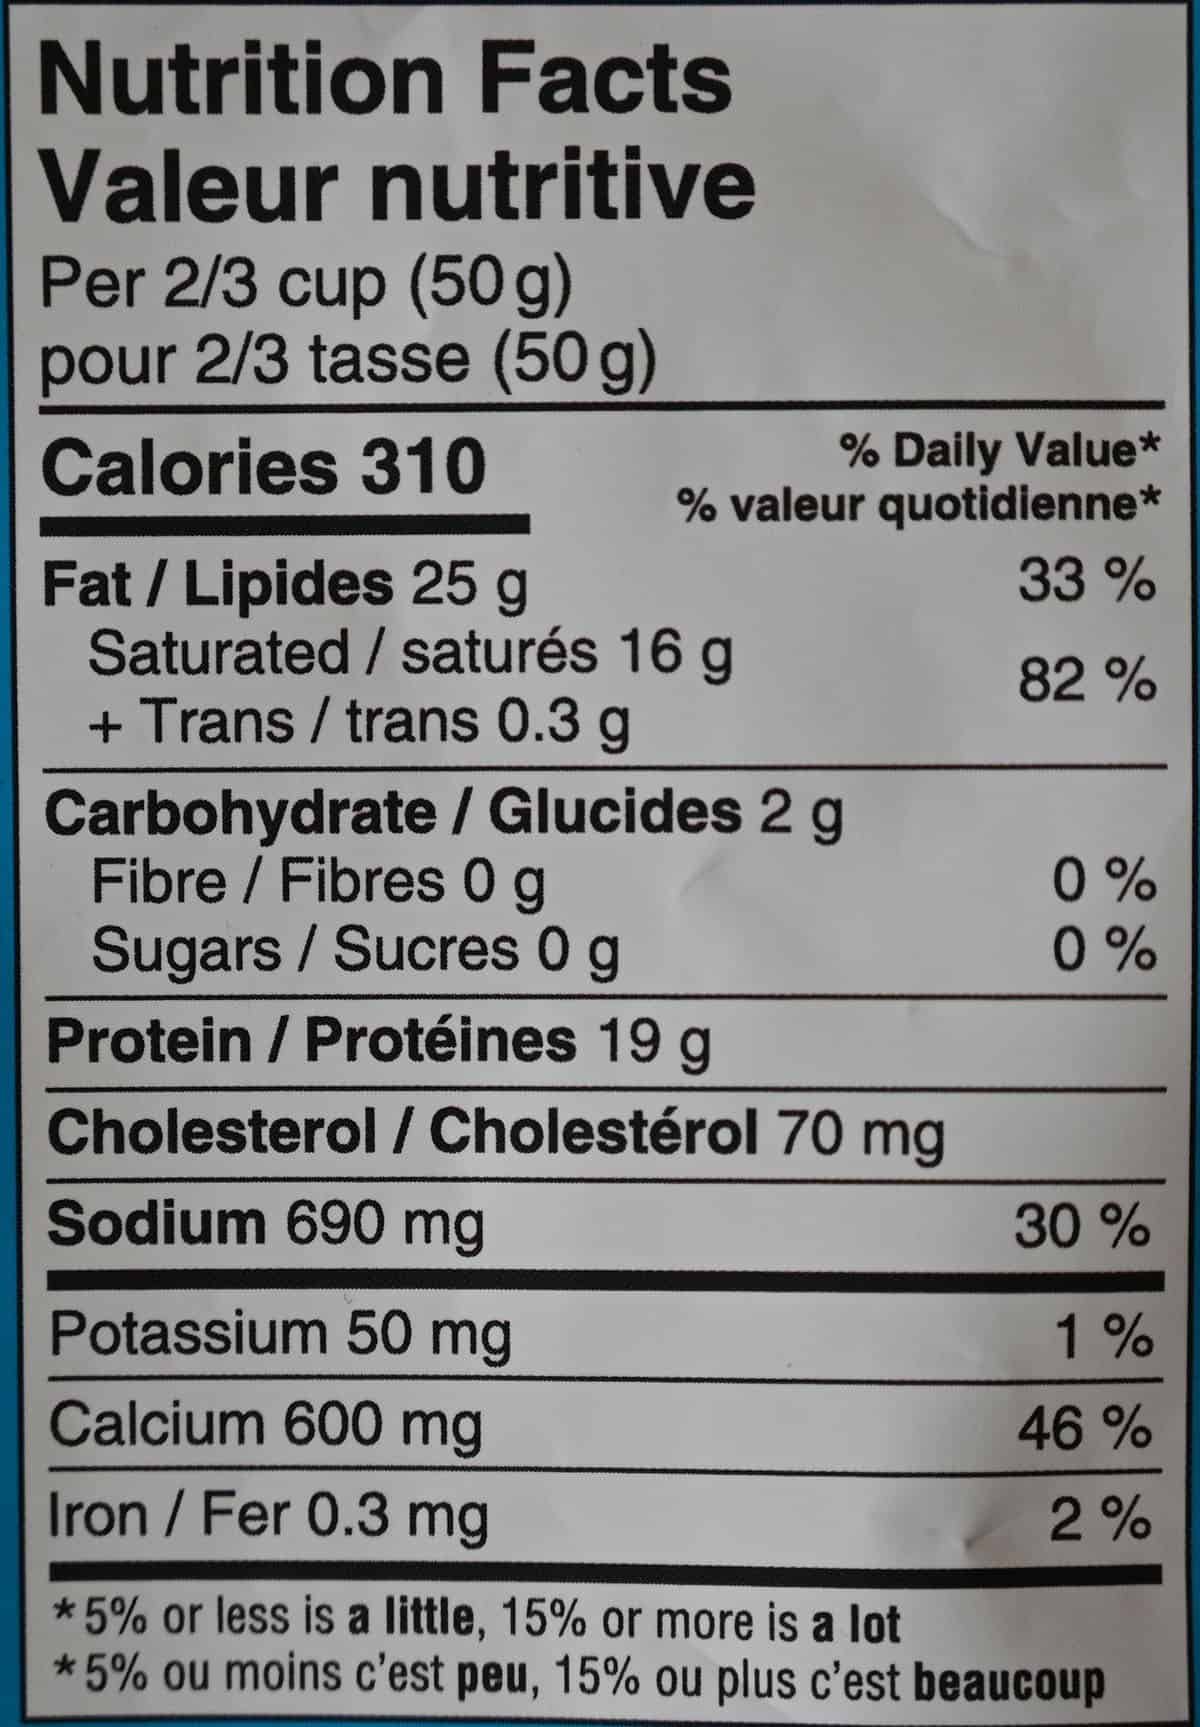 Nutrition facts label from bag. 